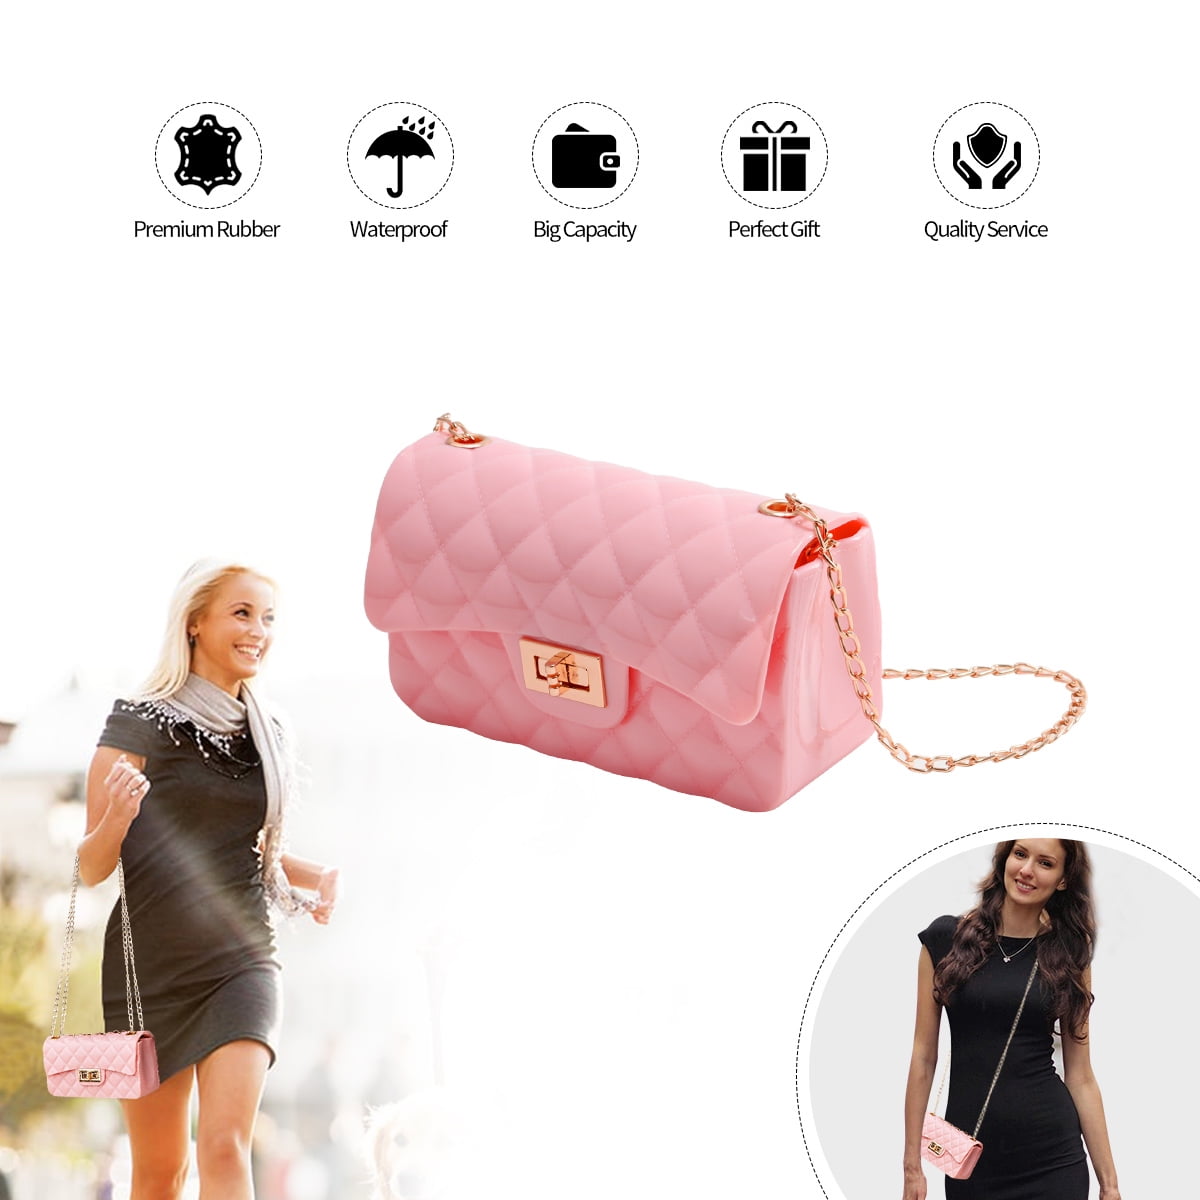 Women's Genuine Leather Hand Clutch Bag, Smartphone Holder Purse, Hand  Clutch for Ladies, Size (L 8.50